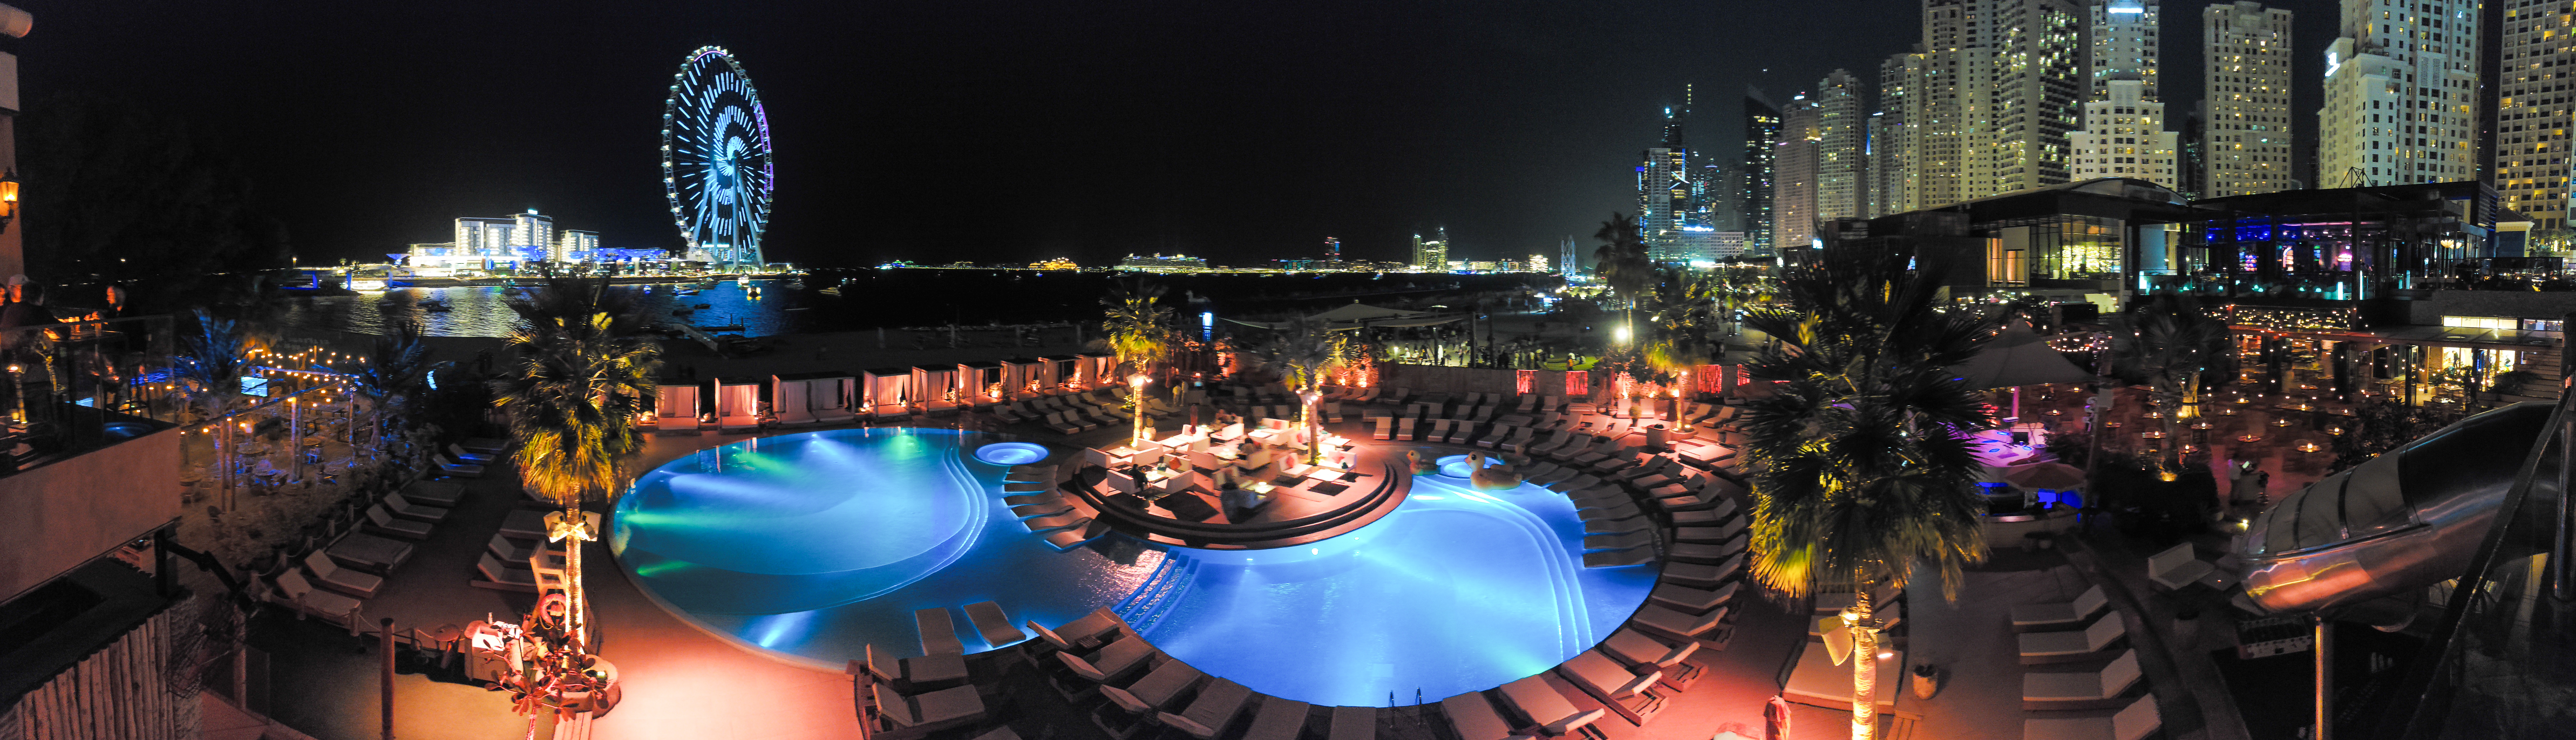 <span  class="uc_style_uc_tiles_grid_image_elementor_uc_items_attribute_title" style="color:#ffffff;">Beach Club in Dubai - elegant + very nice with great attractions</span>